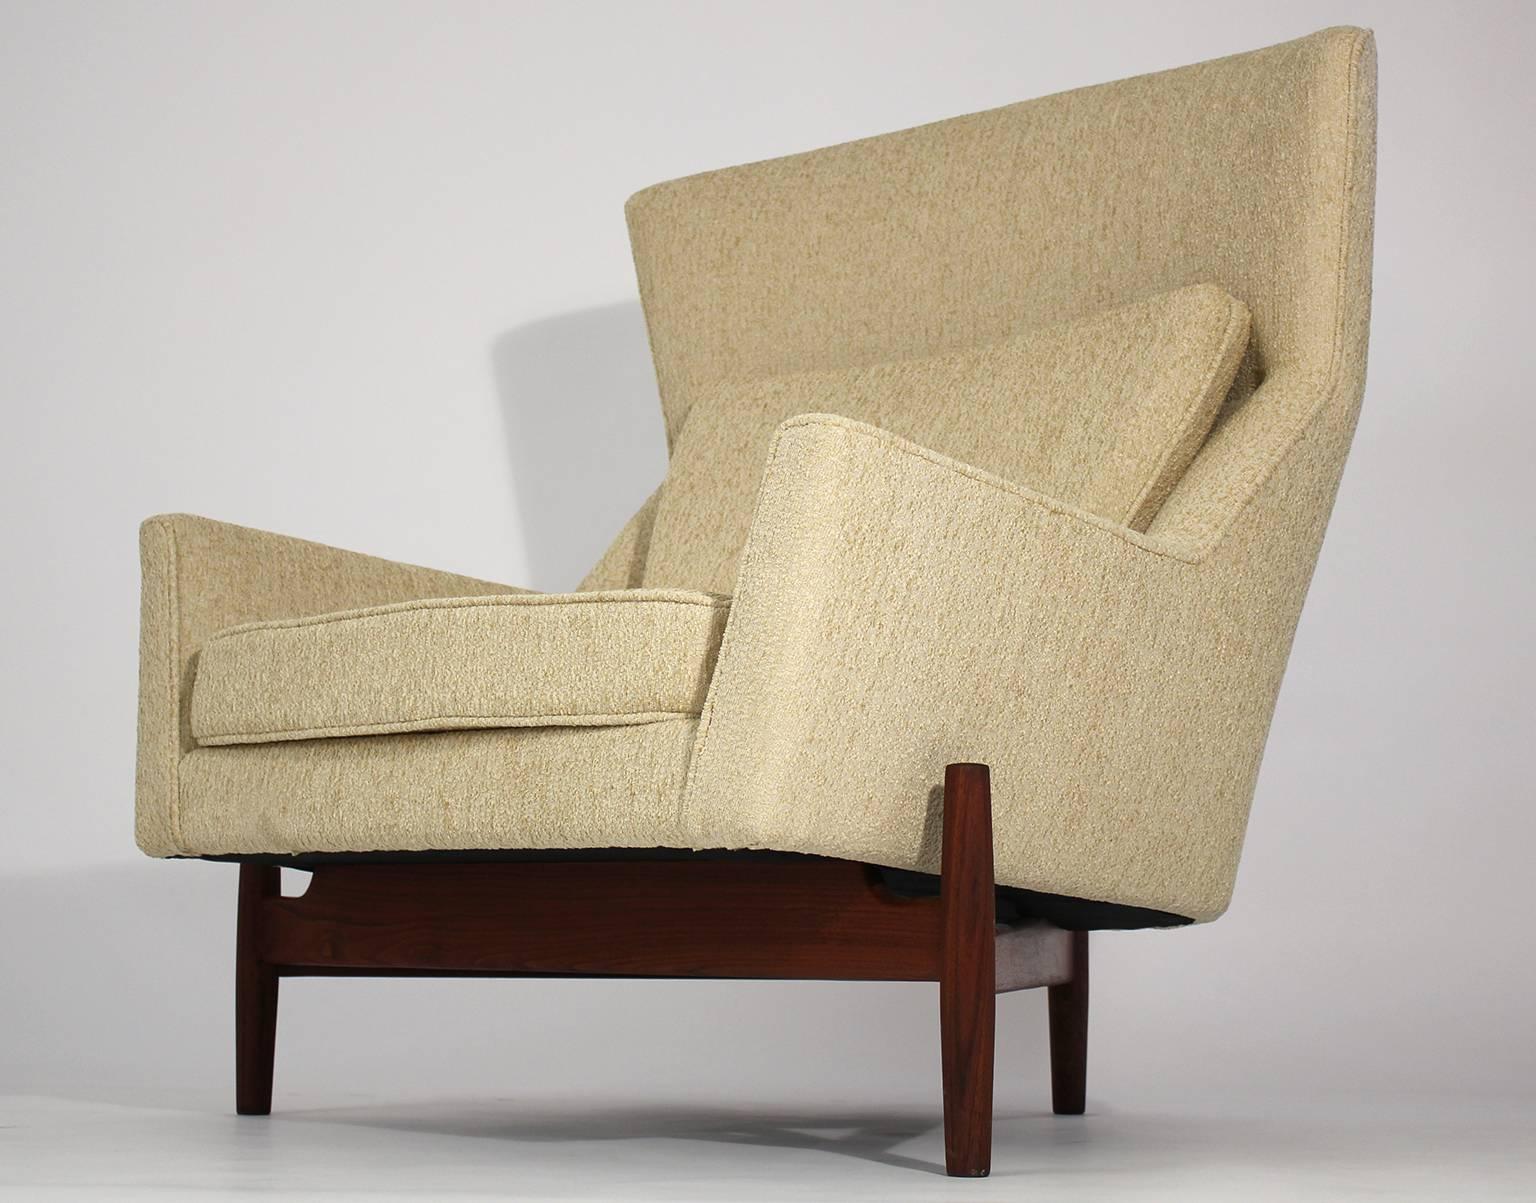 Rare large three-legged modernist lounge chair designed by Jens Risom. Large scale lounge chair that has been completely restored. Circa 1960s. 